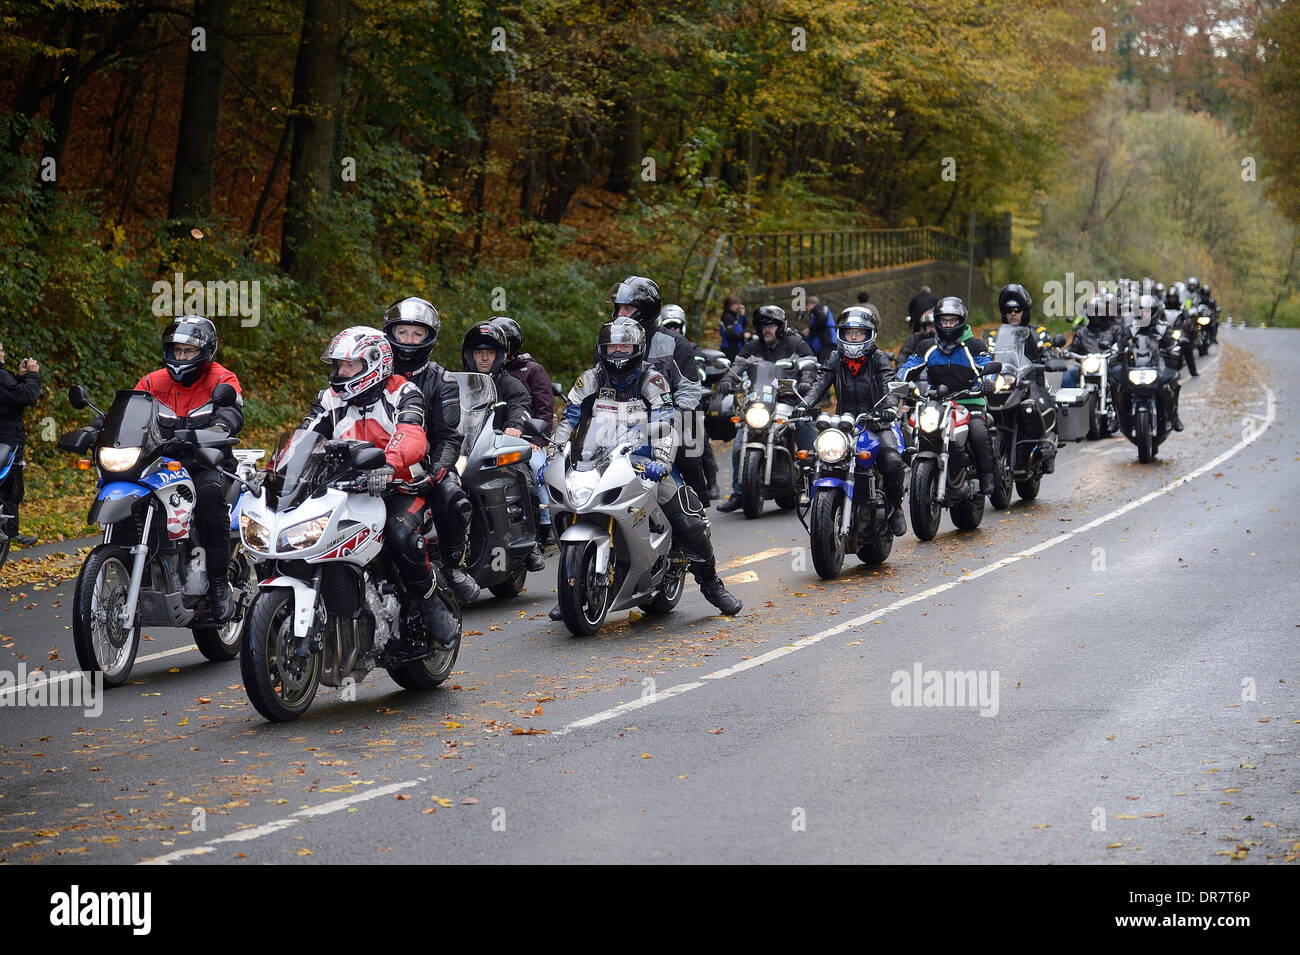 Memorial ride for motorcyclists, Odenthal-Altenberg, North Rhine-Westphalia, Germany Stock Photo